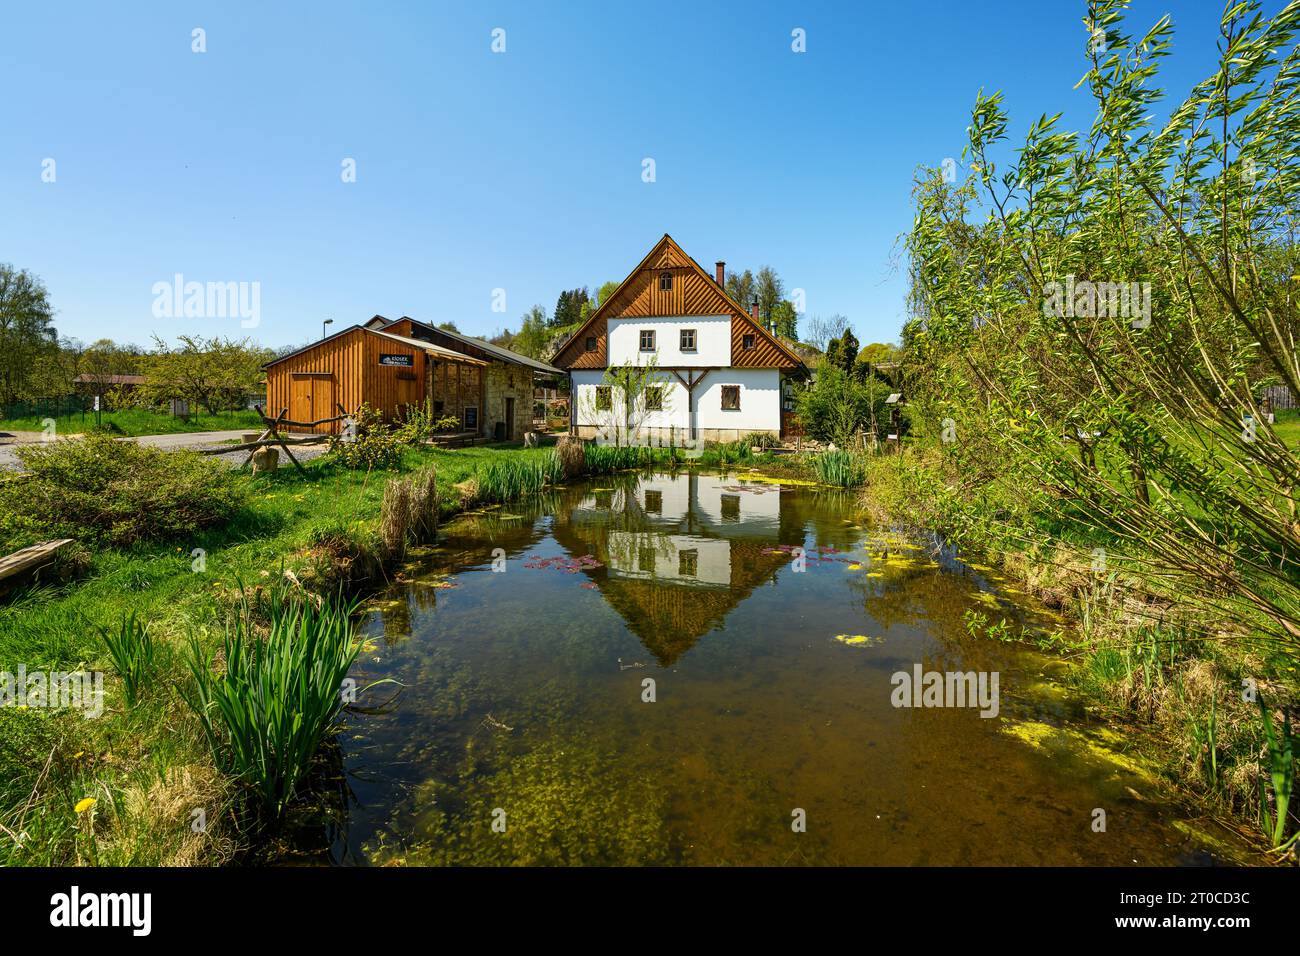 Abel's mill - a wooden historical building in the village of Dolanky, near Turnov in Bohemian Paradise. Stock Photo